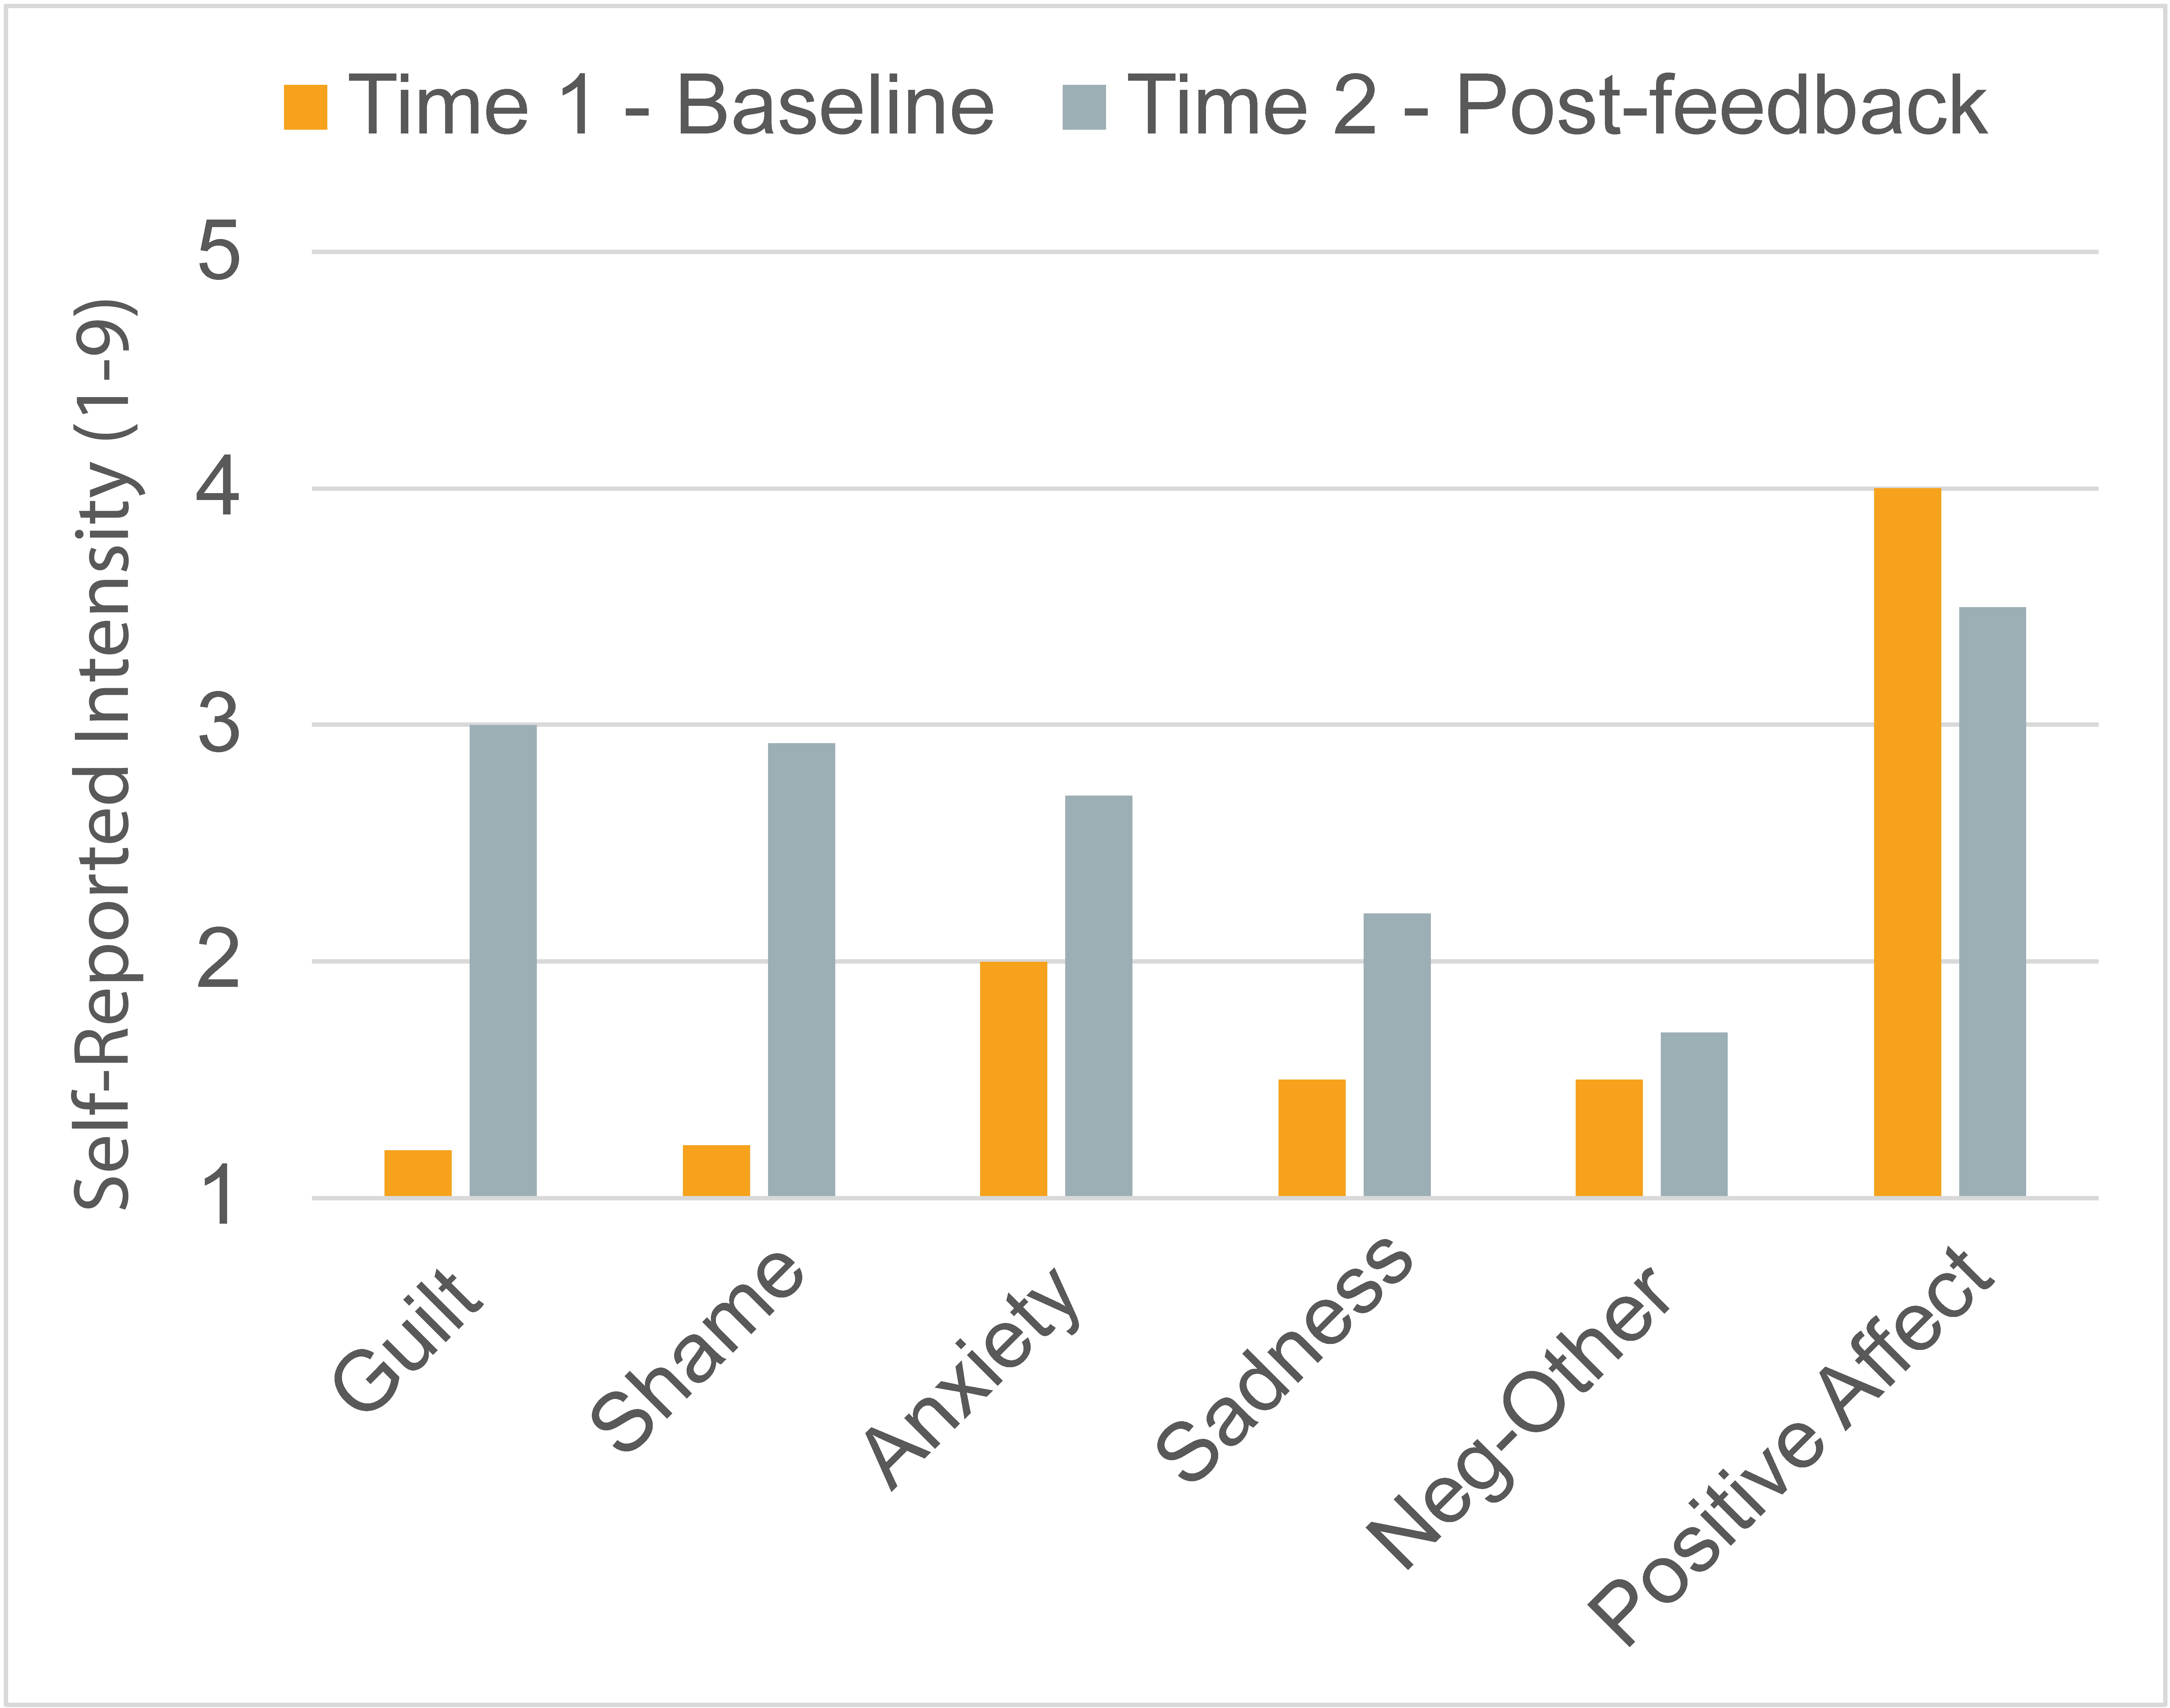 6 emotions: guilt, shame, anxiety, sadness, neg-other, positive affect; that have two bars each, one for baseline (orange), the other for Post-feedback (grey). The y axis measures self-reported intensity